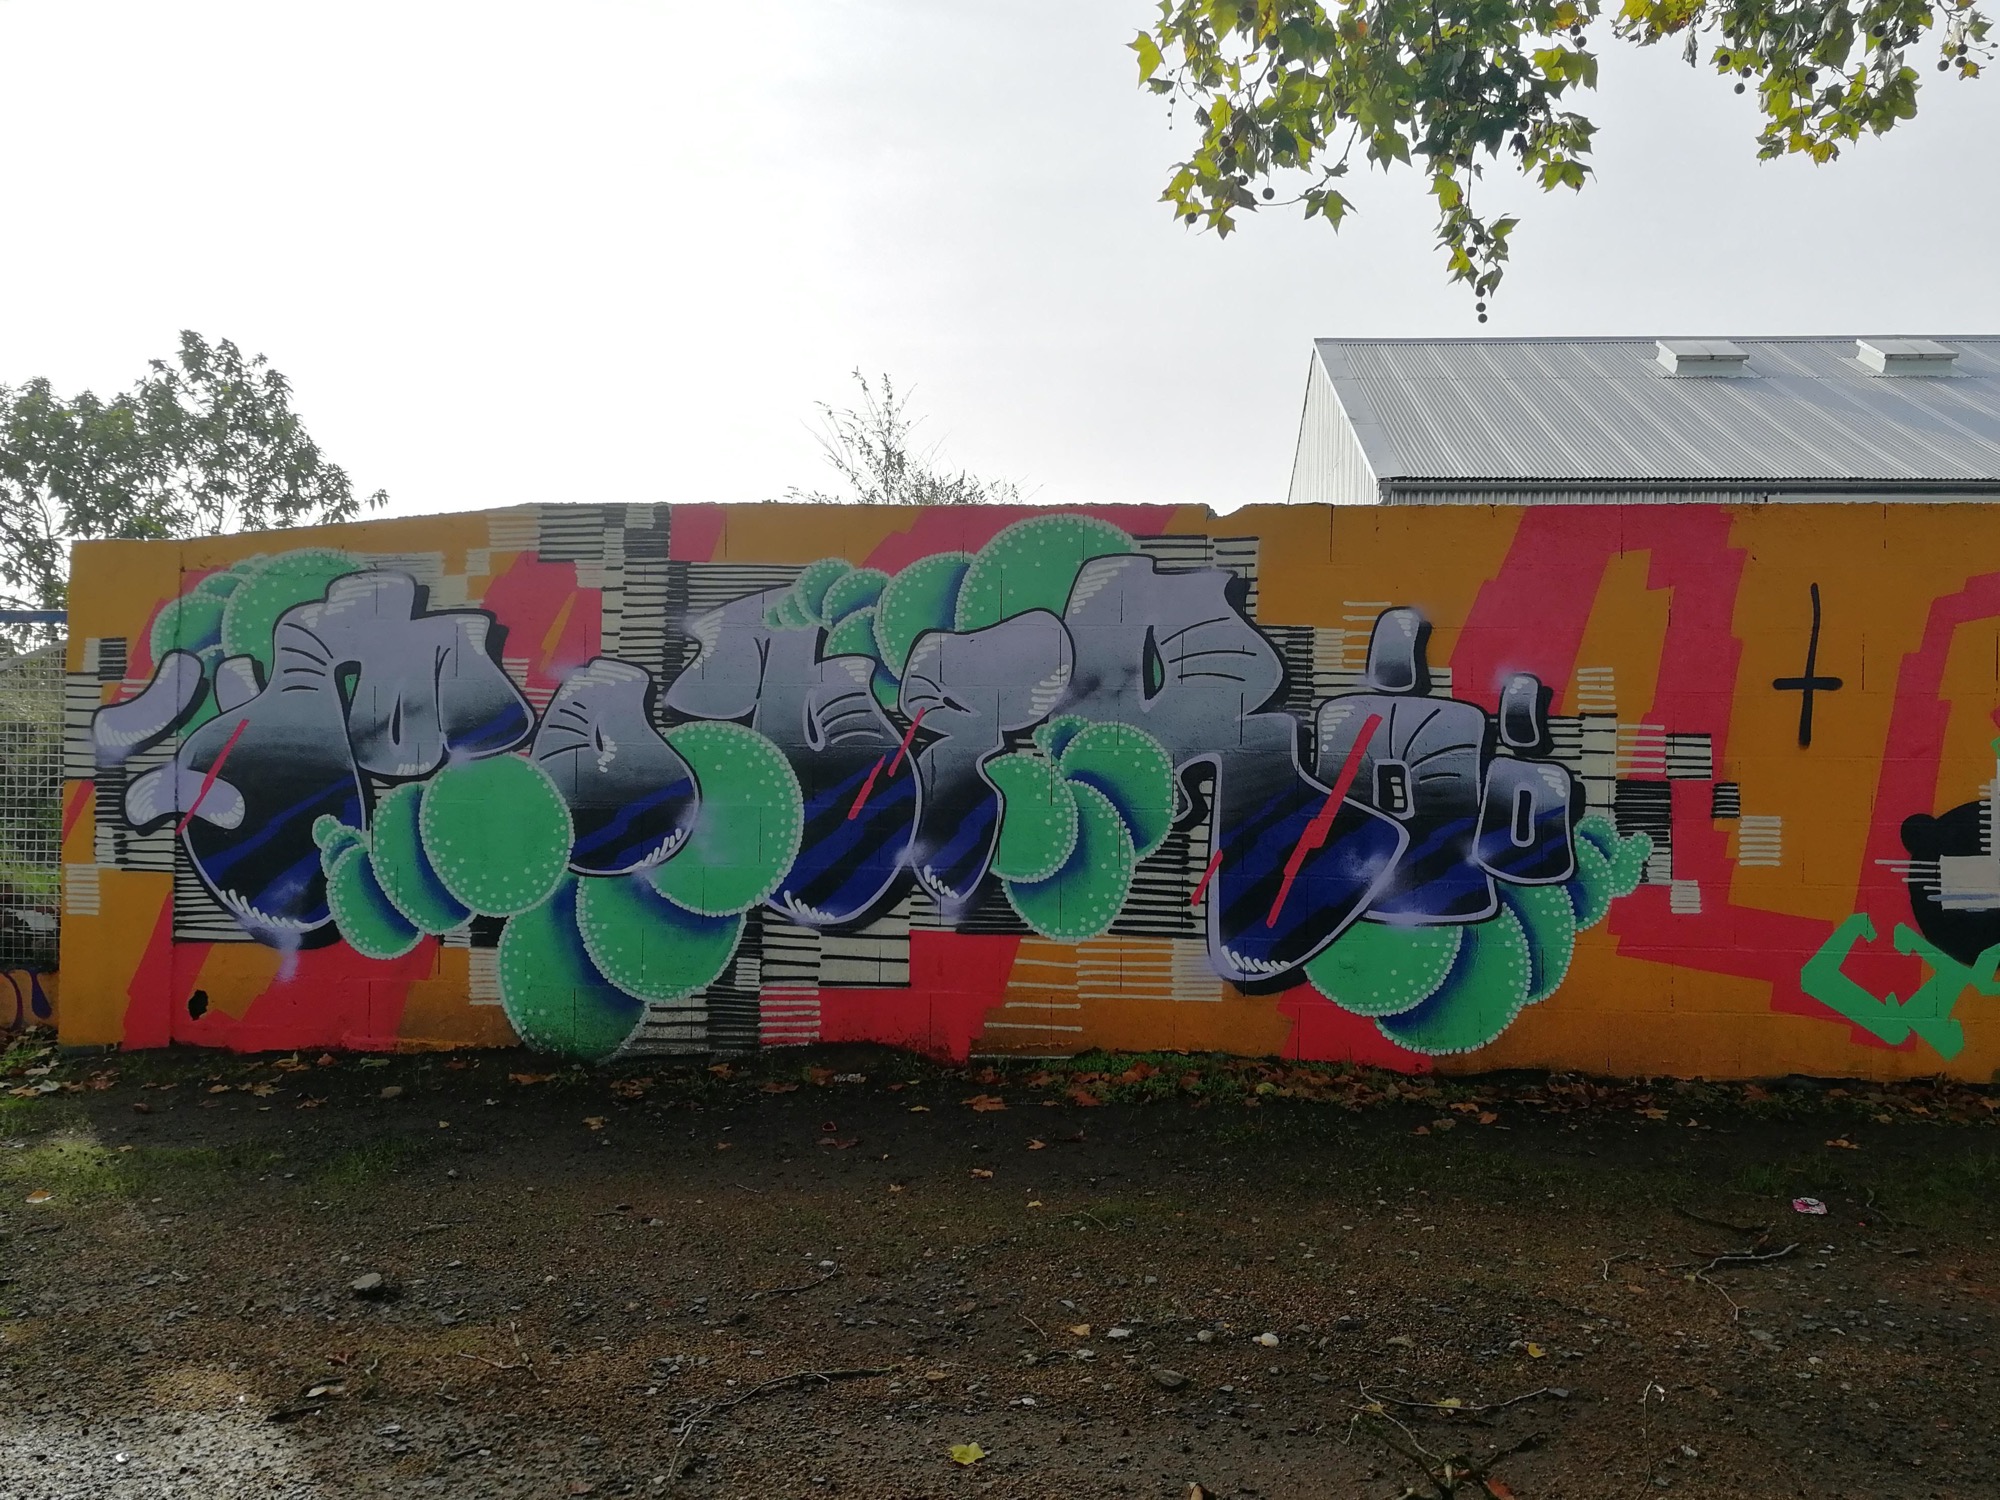 Graffiti 2993  captured by Rabot in Nantes France